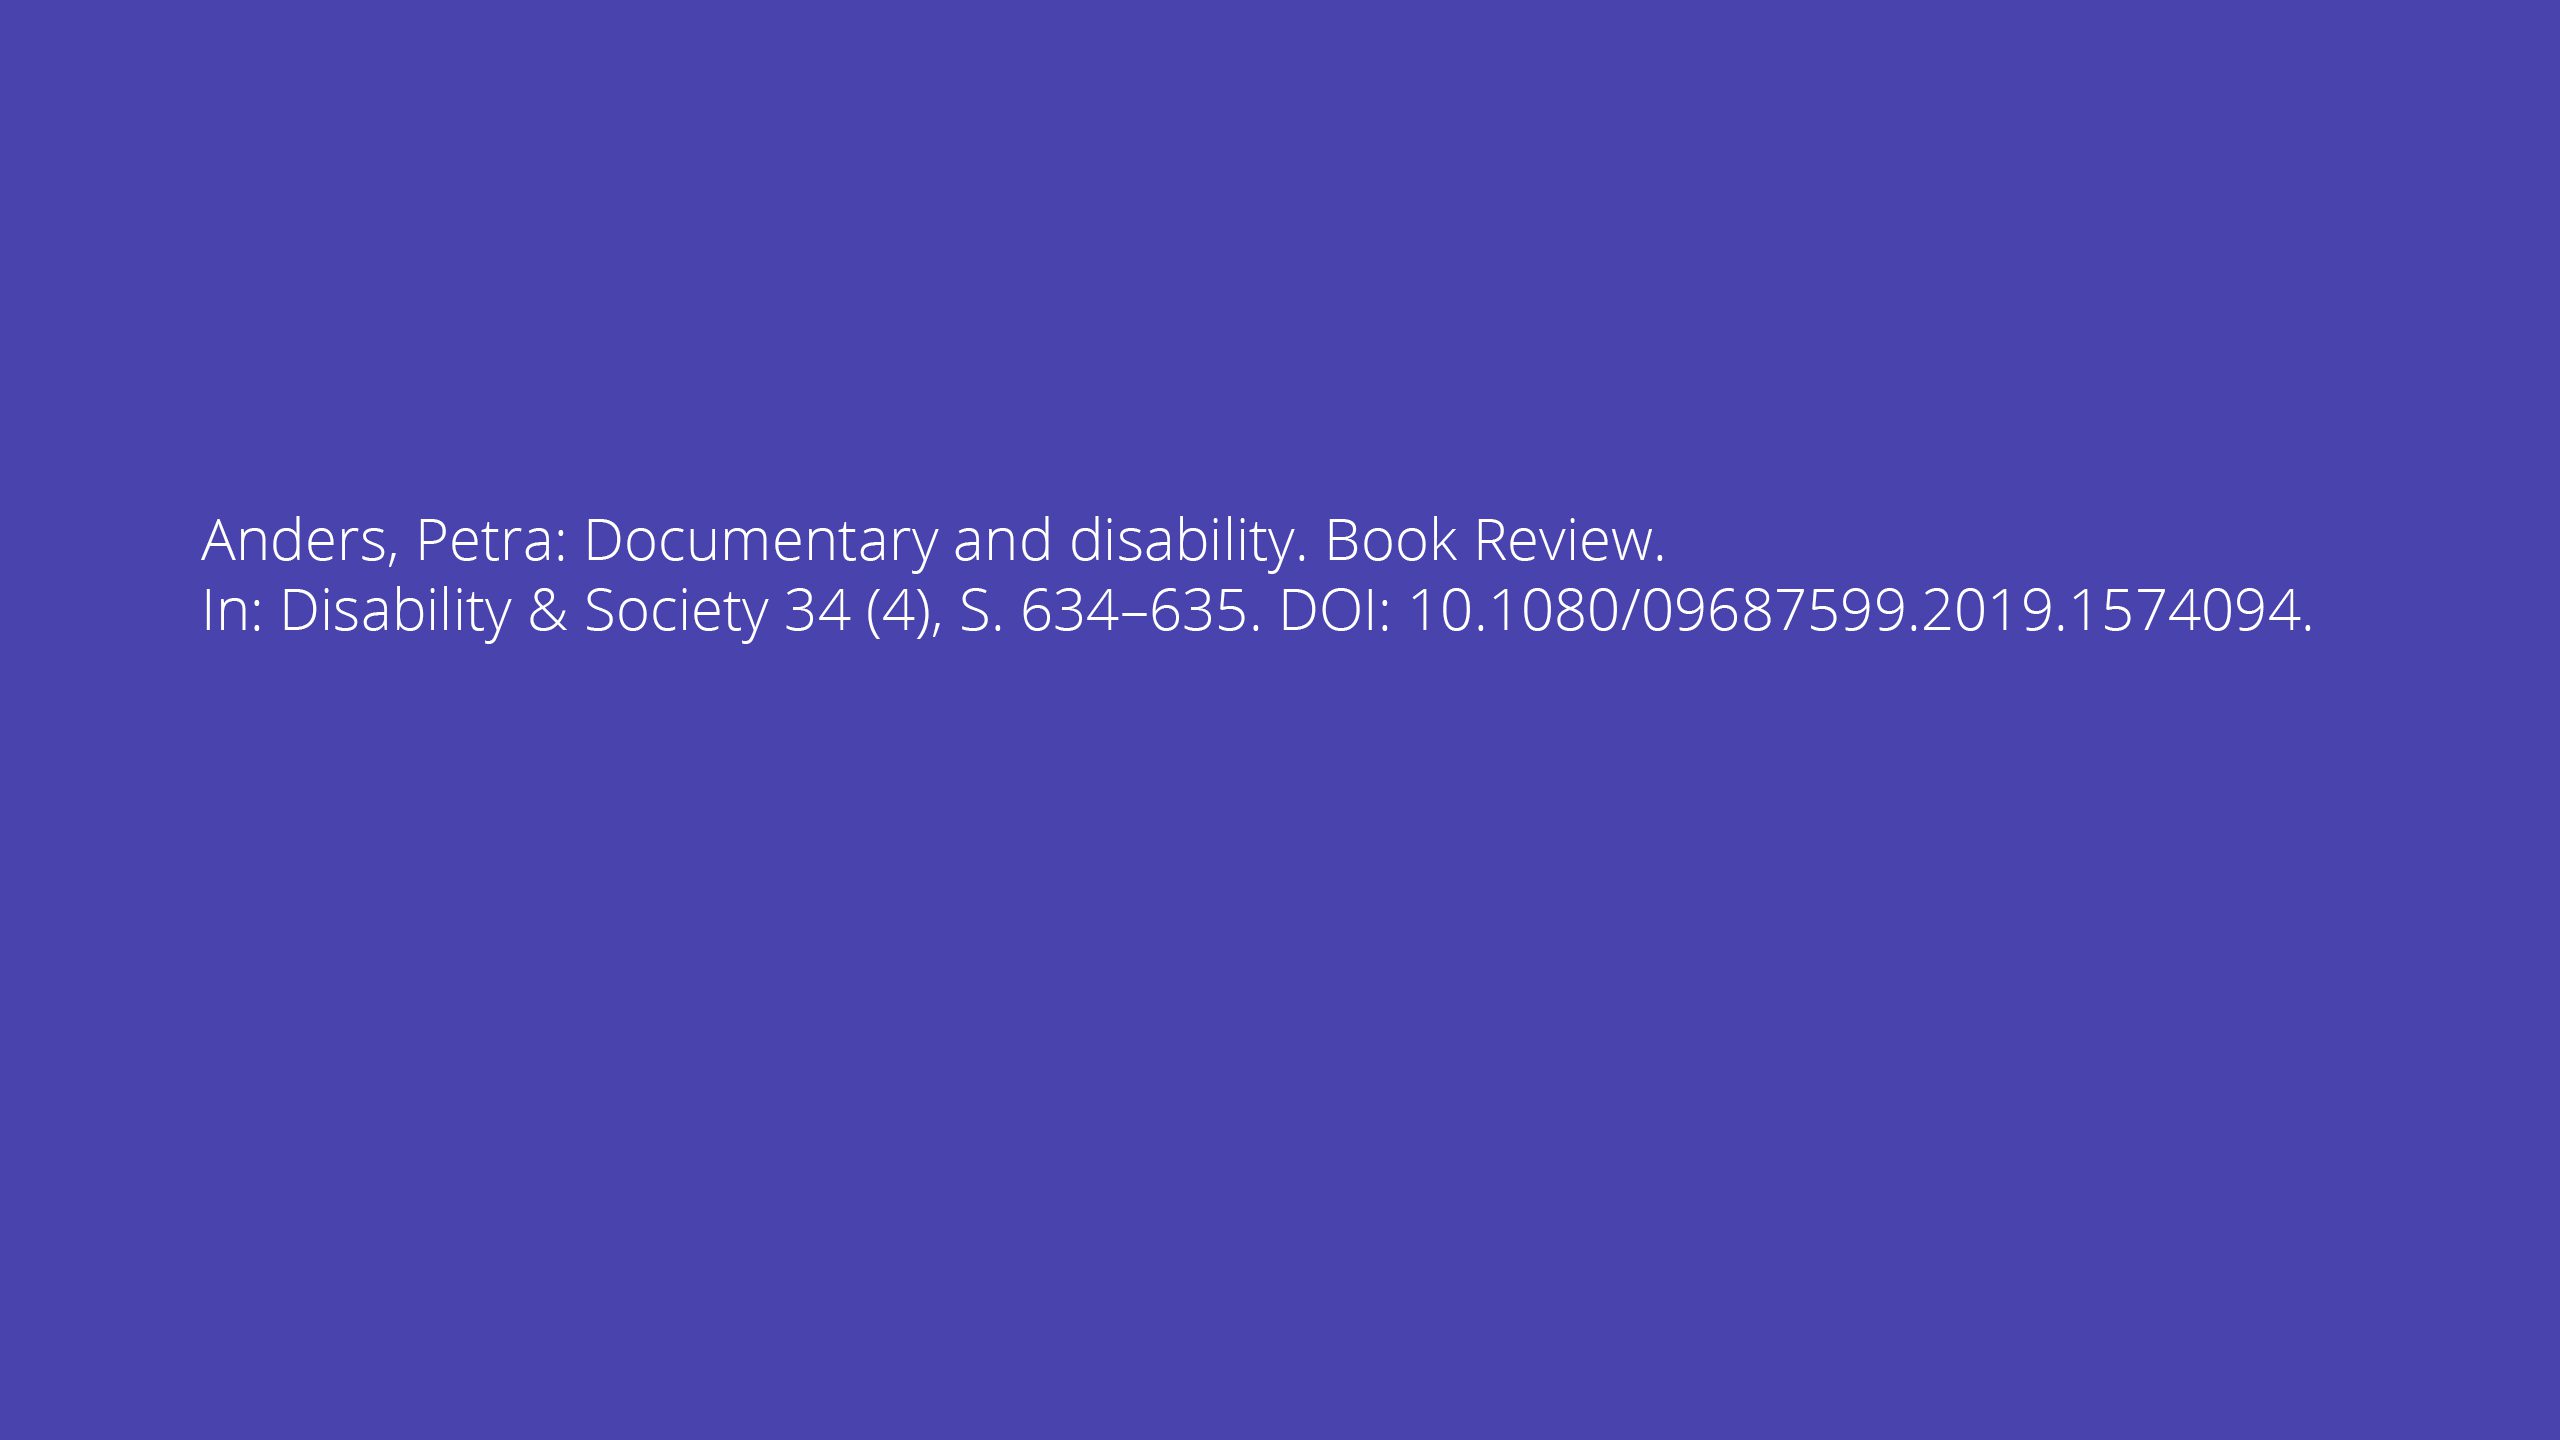 Anders, Petra: Documentary and disability. Book Review. In: Disability & Society 34 (4), S. 634–635. DOI: 10.1080/09687599.2019.1574094.